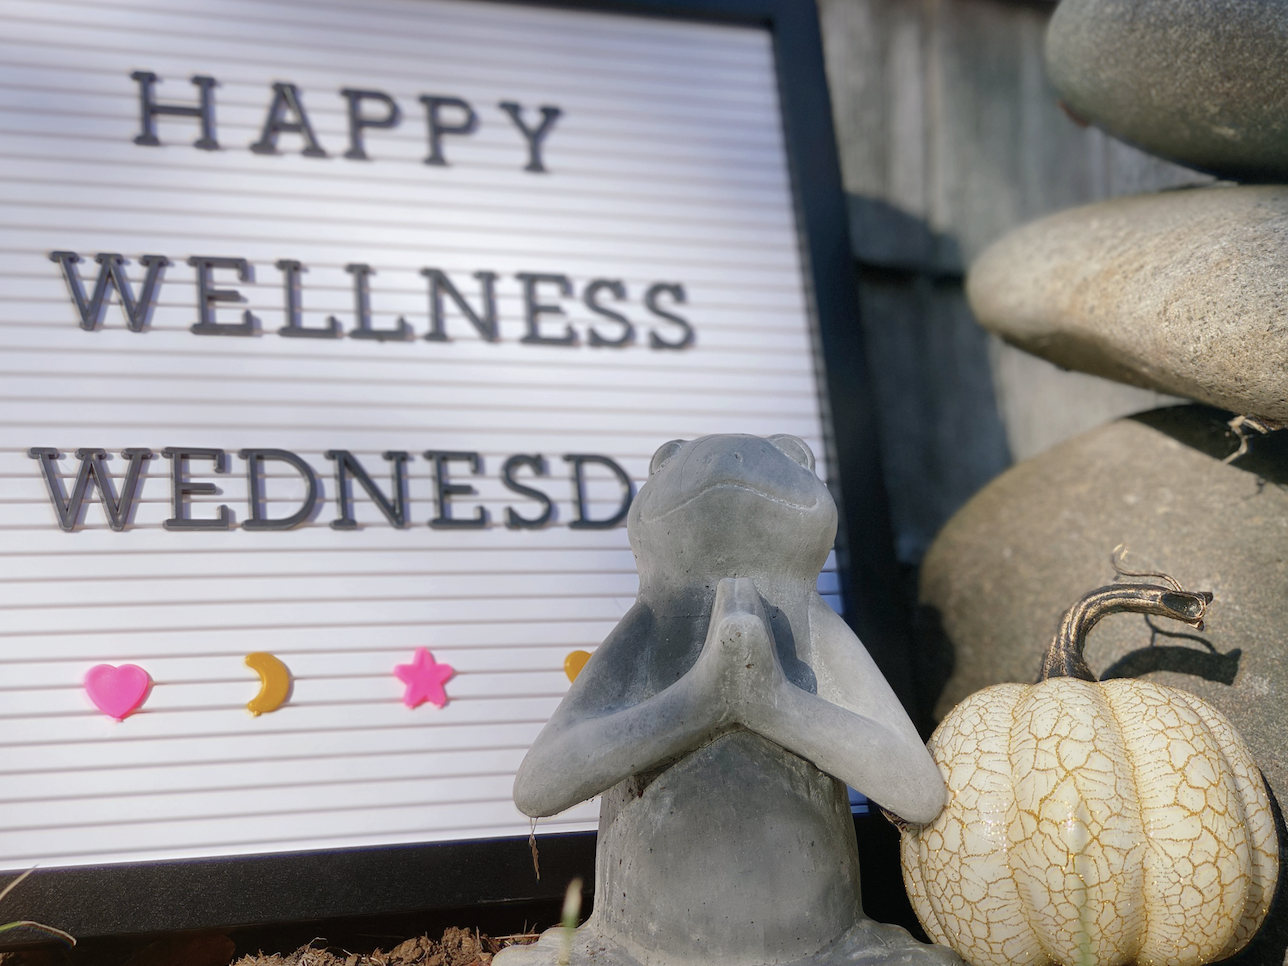 Letter Board with Happy Wellness Wednesday and other Fall Decor surrounding it